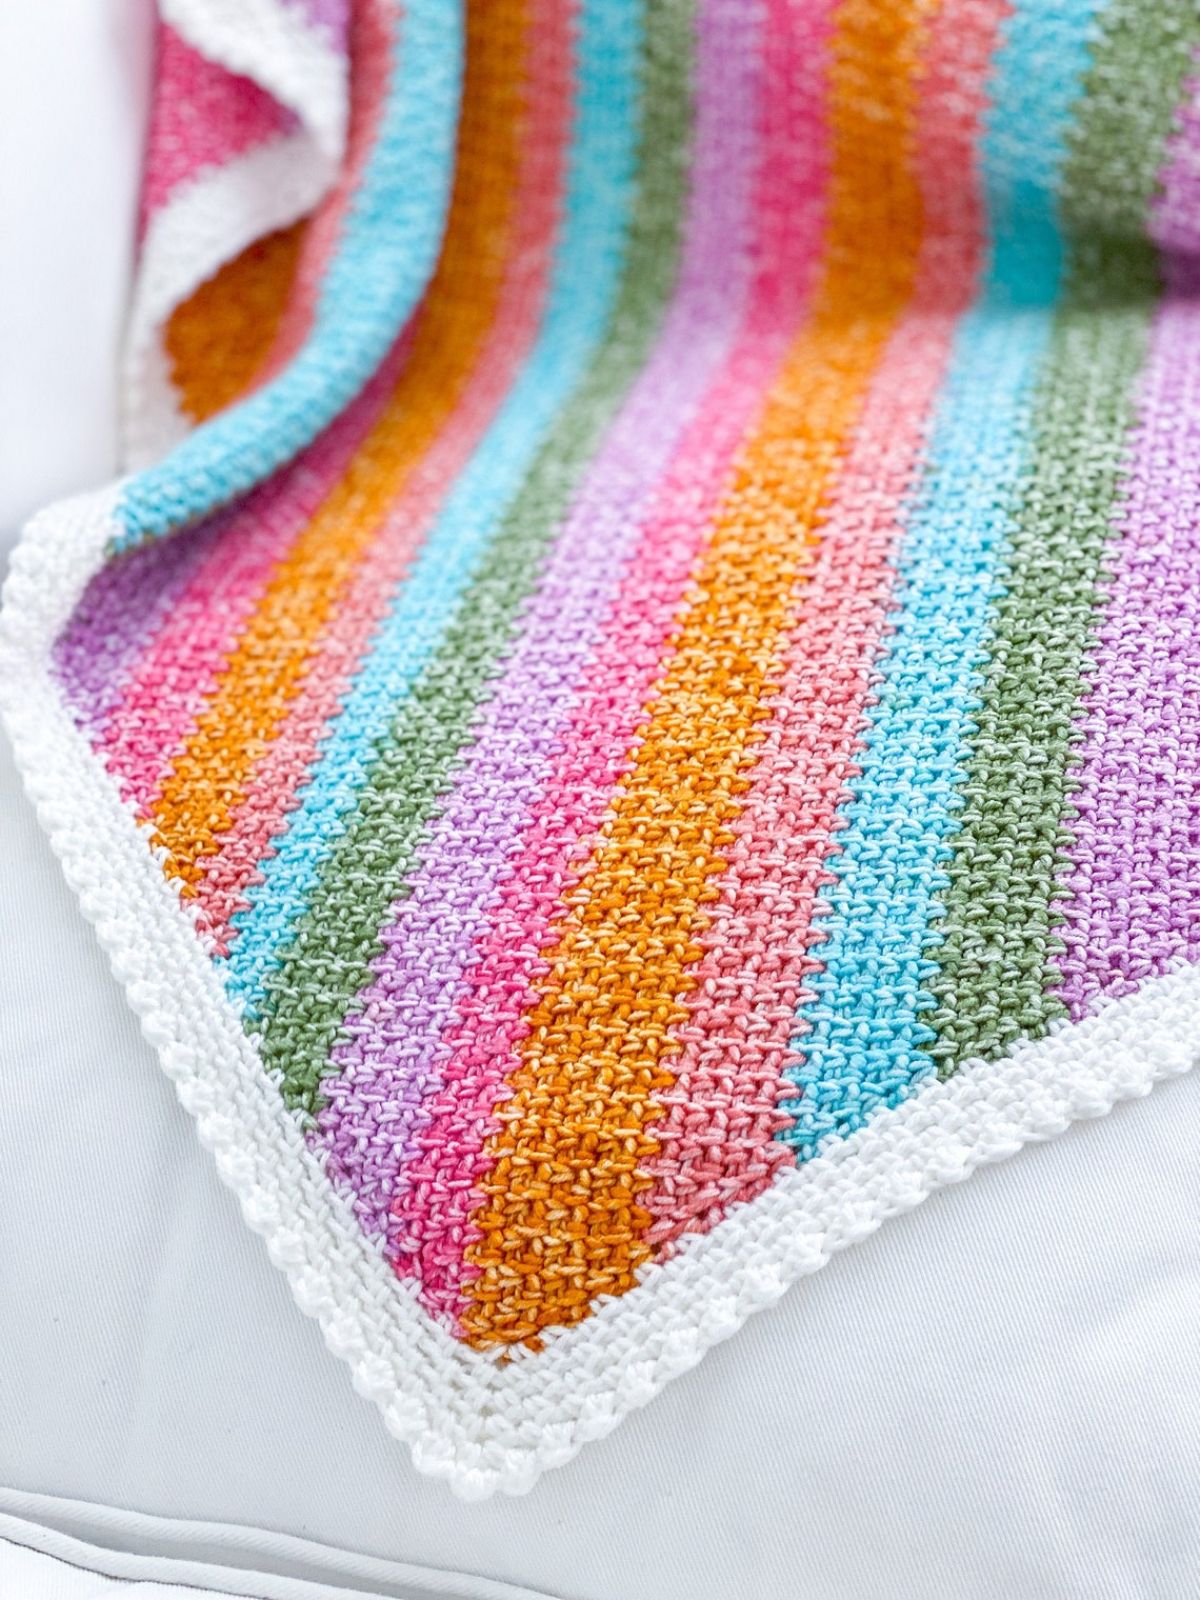 A pink, blue, orange, purple, and green vertical striped crochet blanket with a white bobble border on all sides.